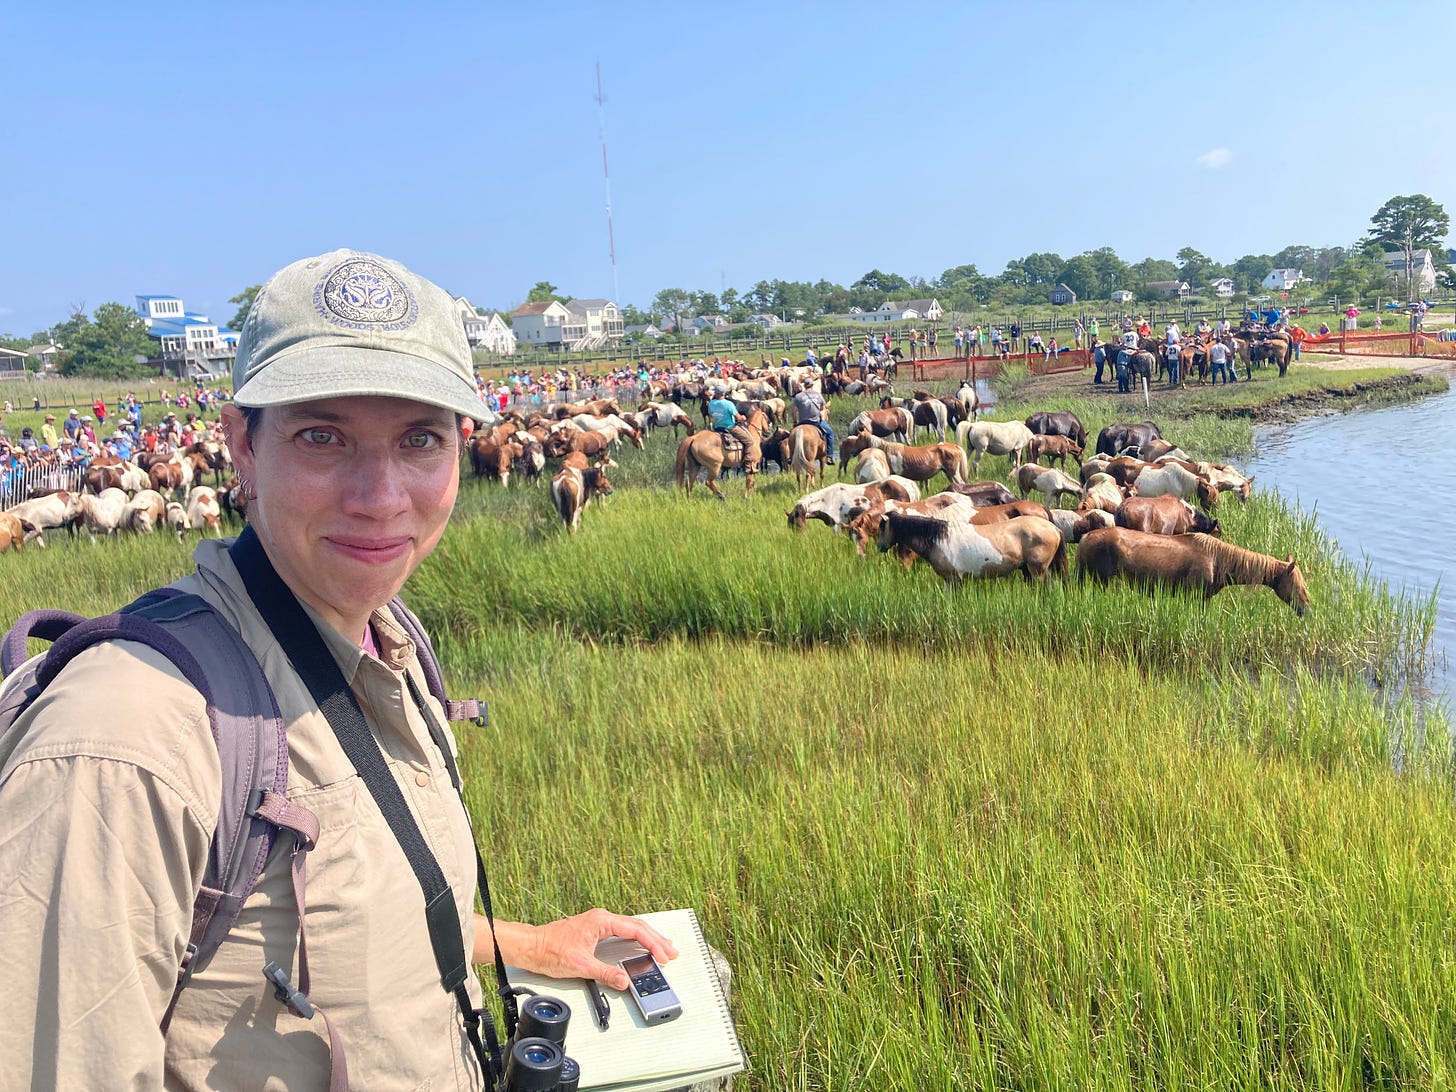 A woman in a tan shirt, green hat, and binoculars holds a notebook and recorder. She is standing in front of a patch of salt marsh and a herd of ponies.